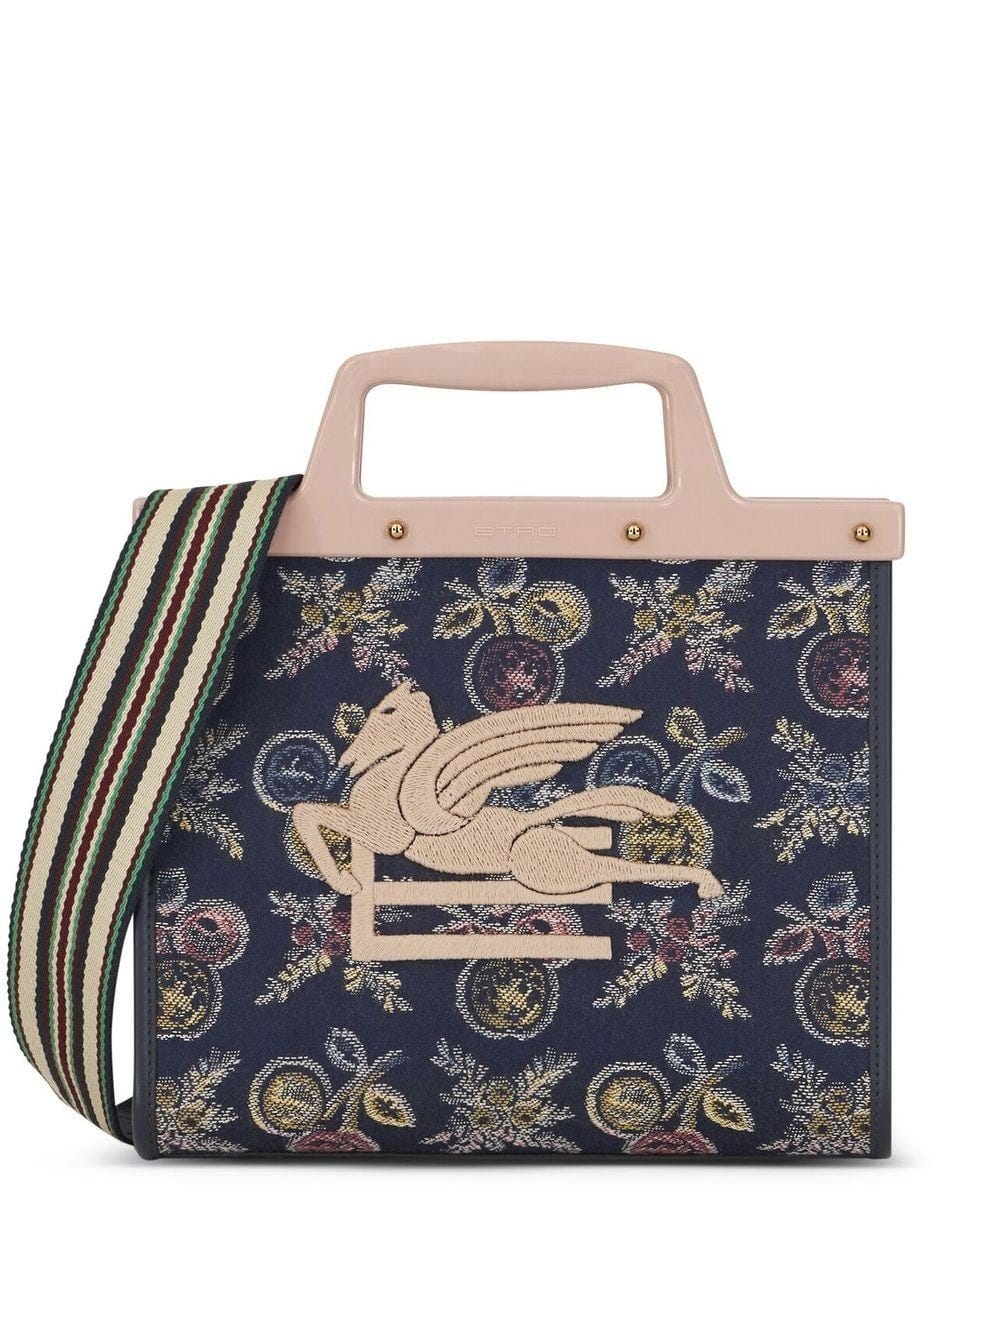 ETRO BLUE TOTE BAG WITH JACQUARD EFFECT